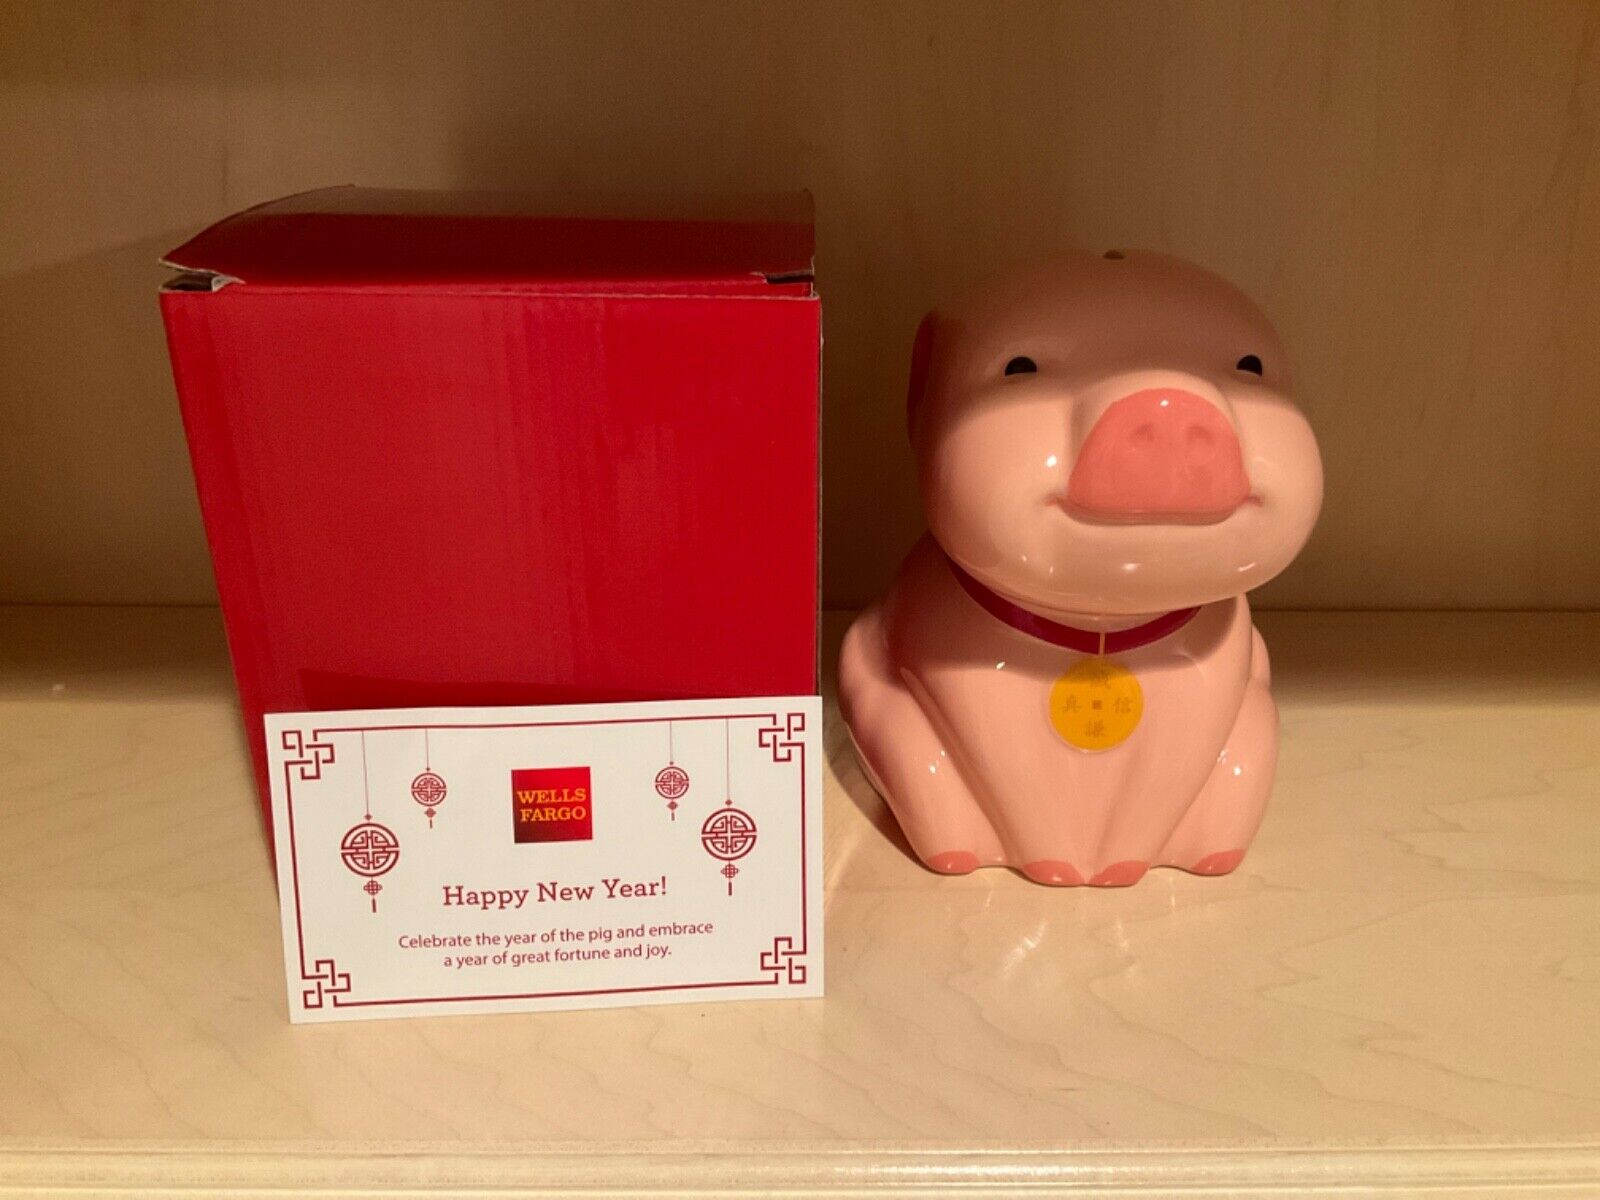 Wells Fargo Bank - 2019 Chinese New Year of the Pig Bank (Brand New in Box)